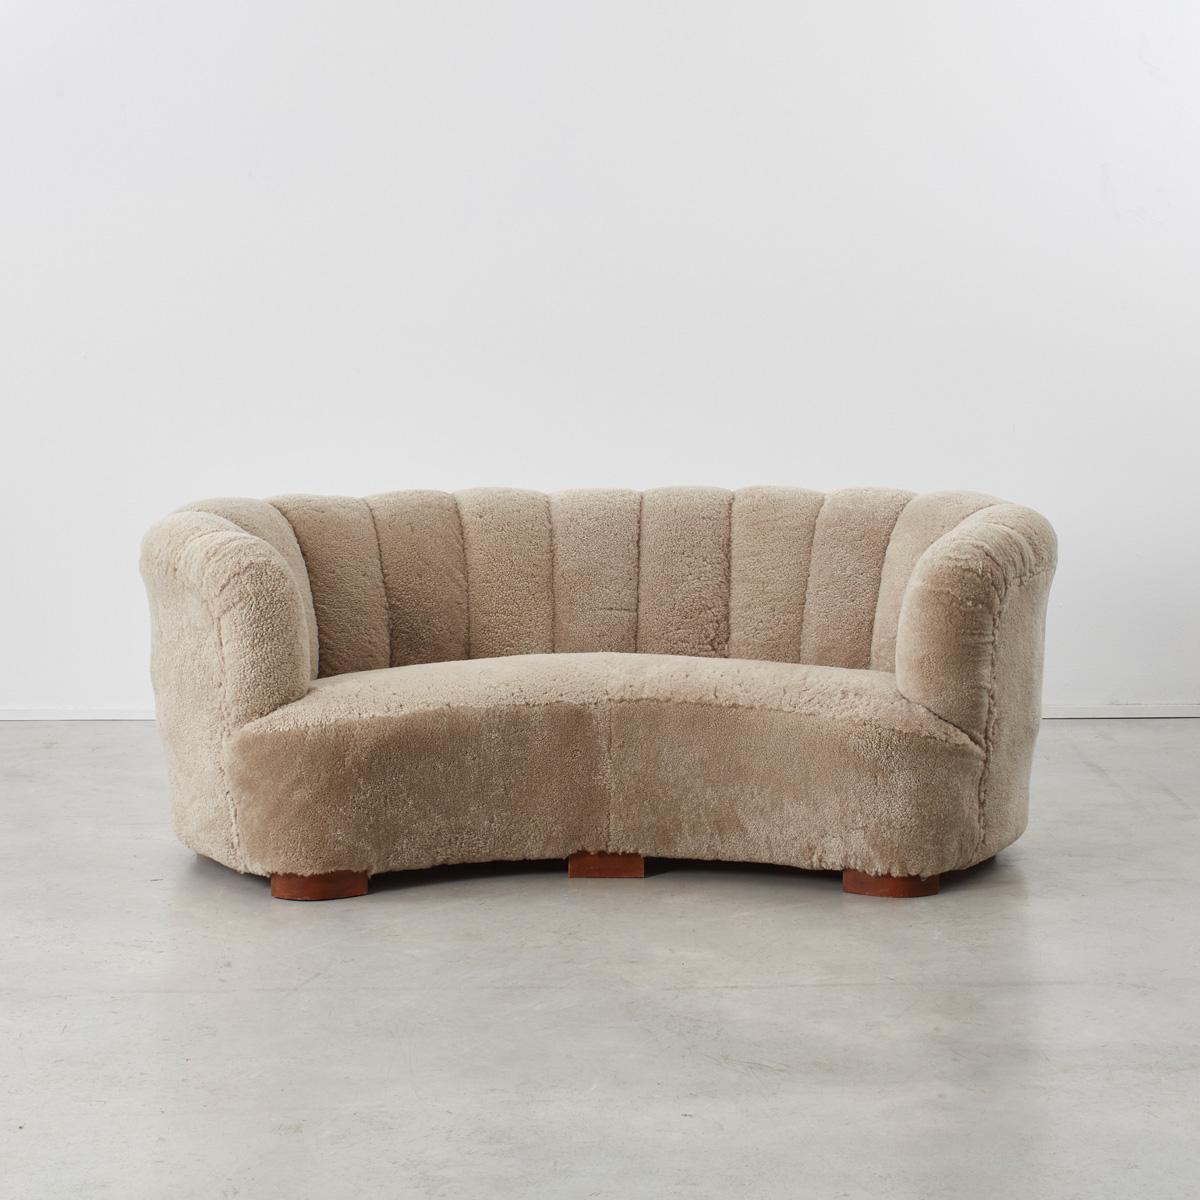 Early 1940s Danish Banana three-seat sofa in the manner of architect Flemming Lassen, newly reupholstered in genuine sheep’s pelts. The sofa is of excellent craftsmanship, probably made by Slagelse Møbelværk, Denmark using proper materials, solid